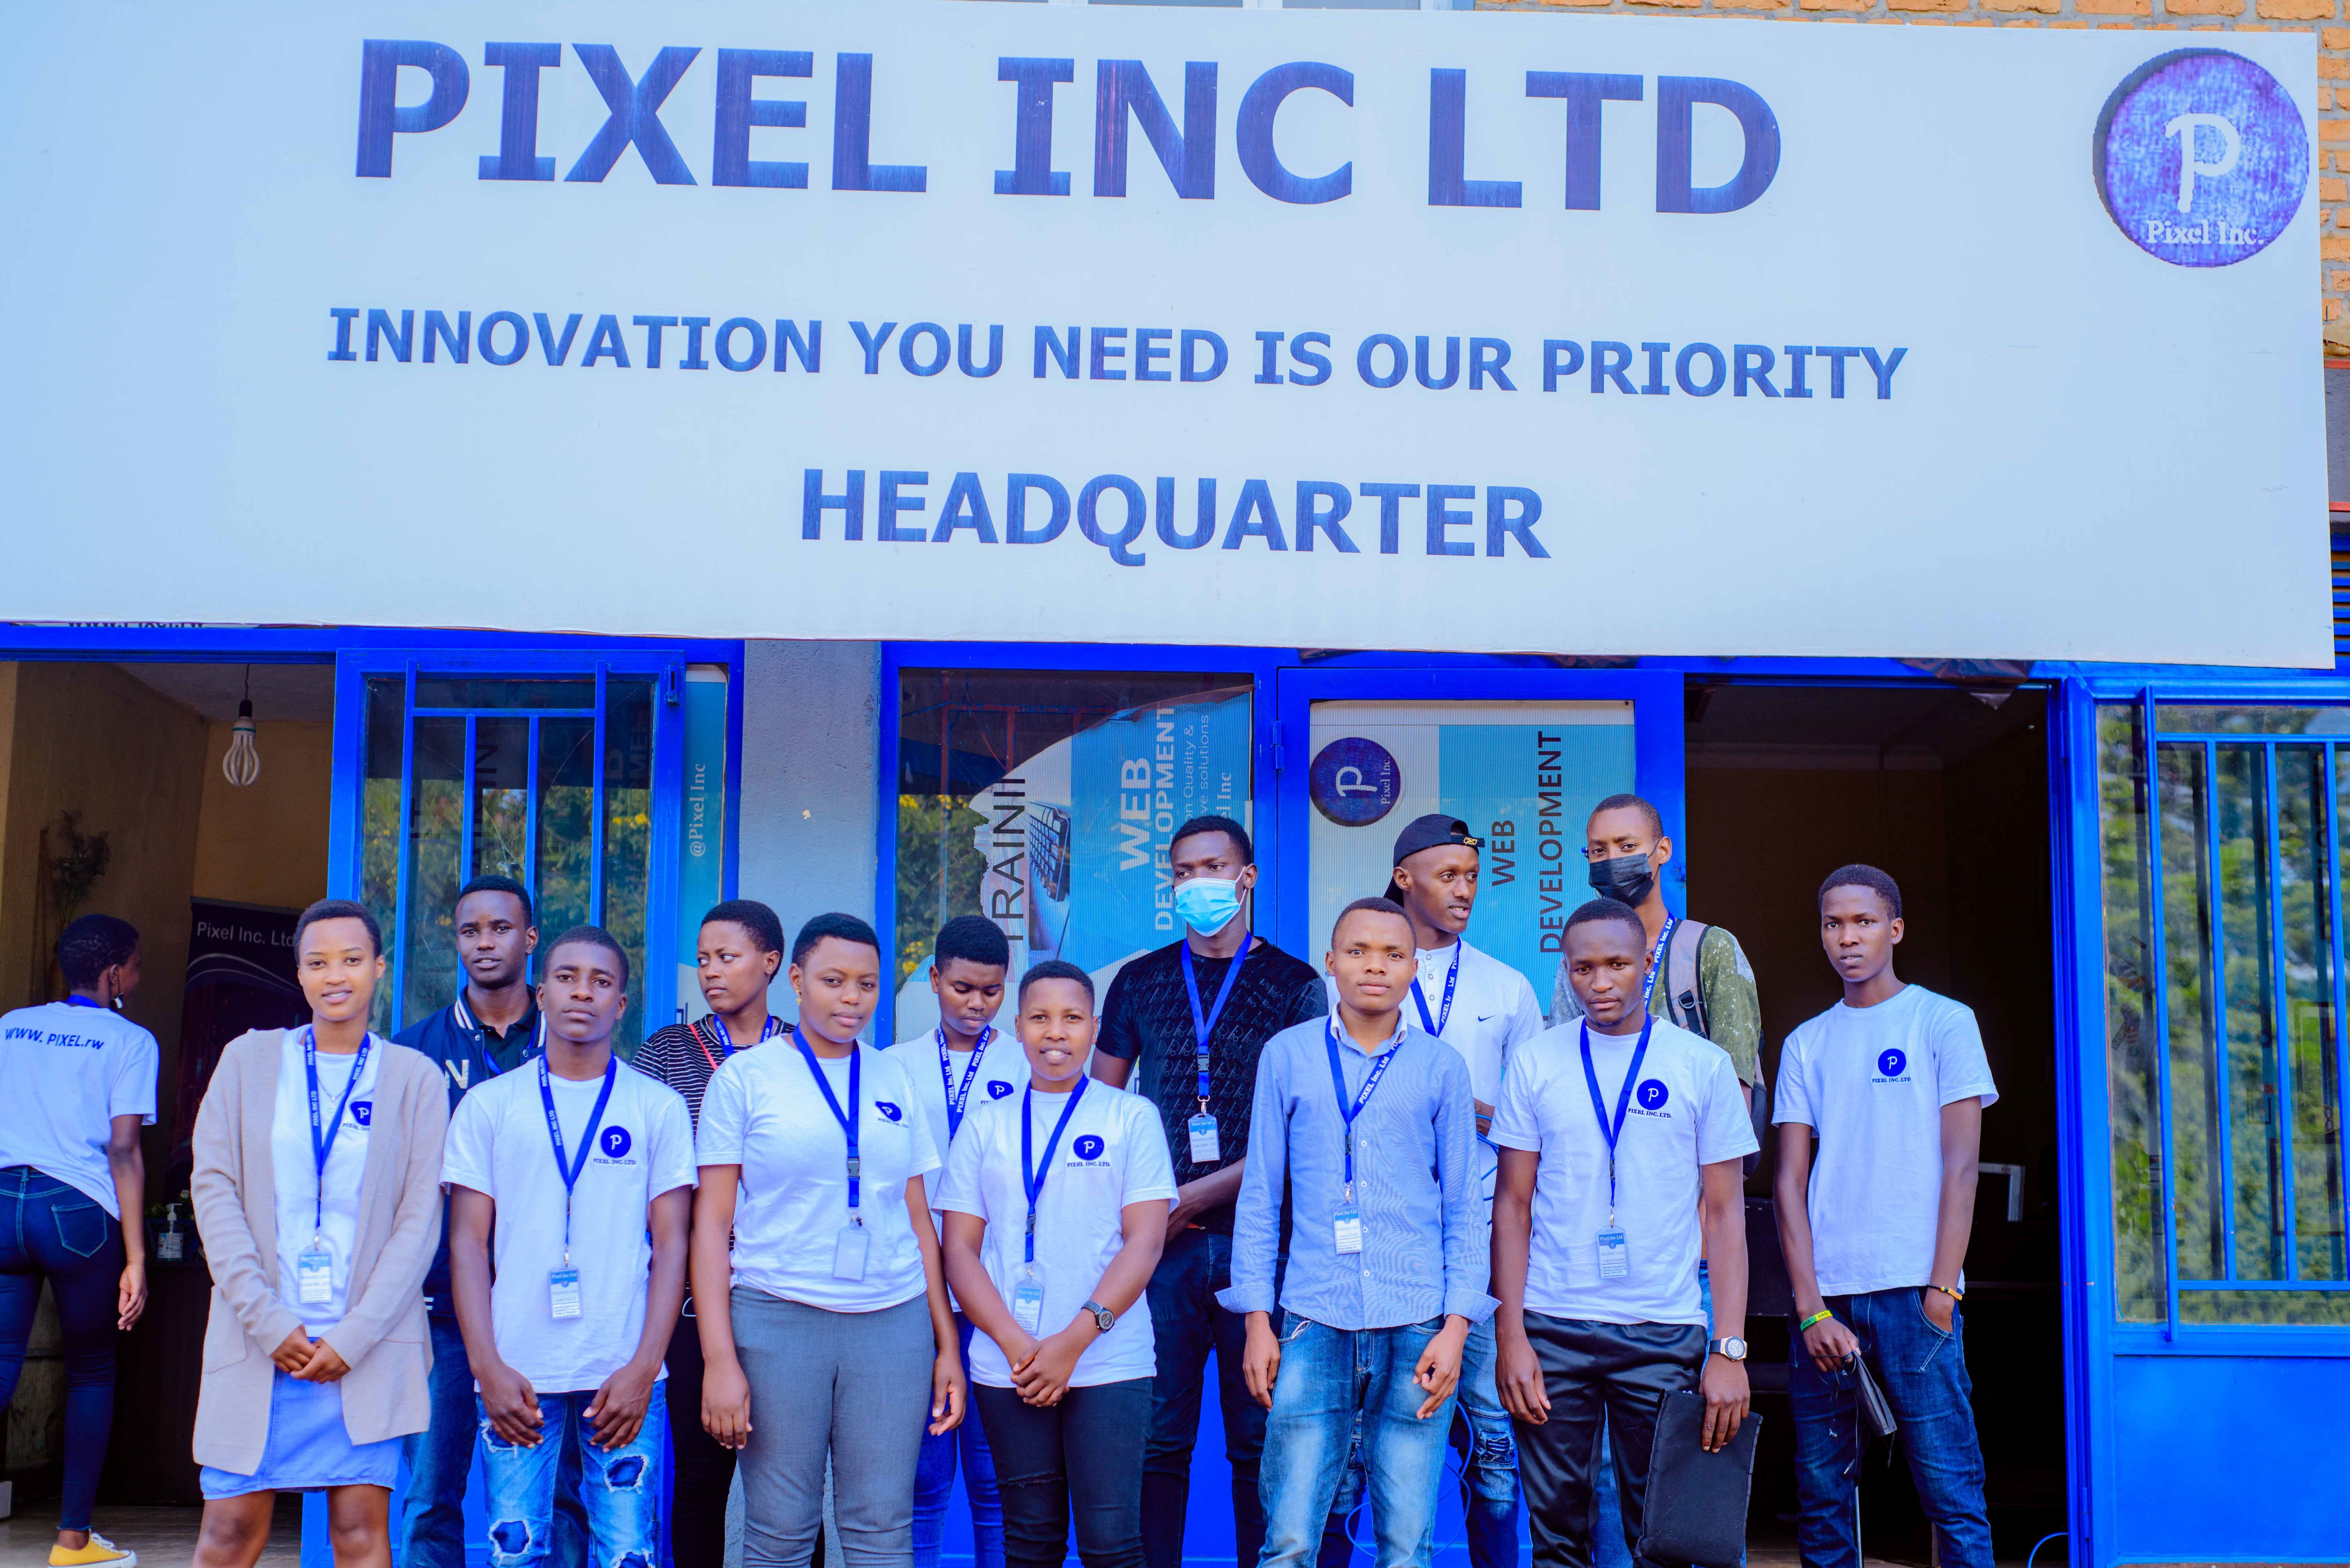 Pixel Inc. Ltd received students from 10 different schools